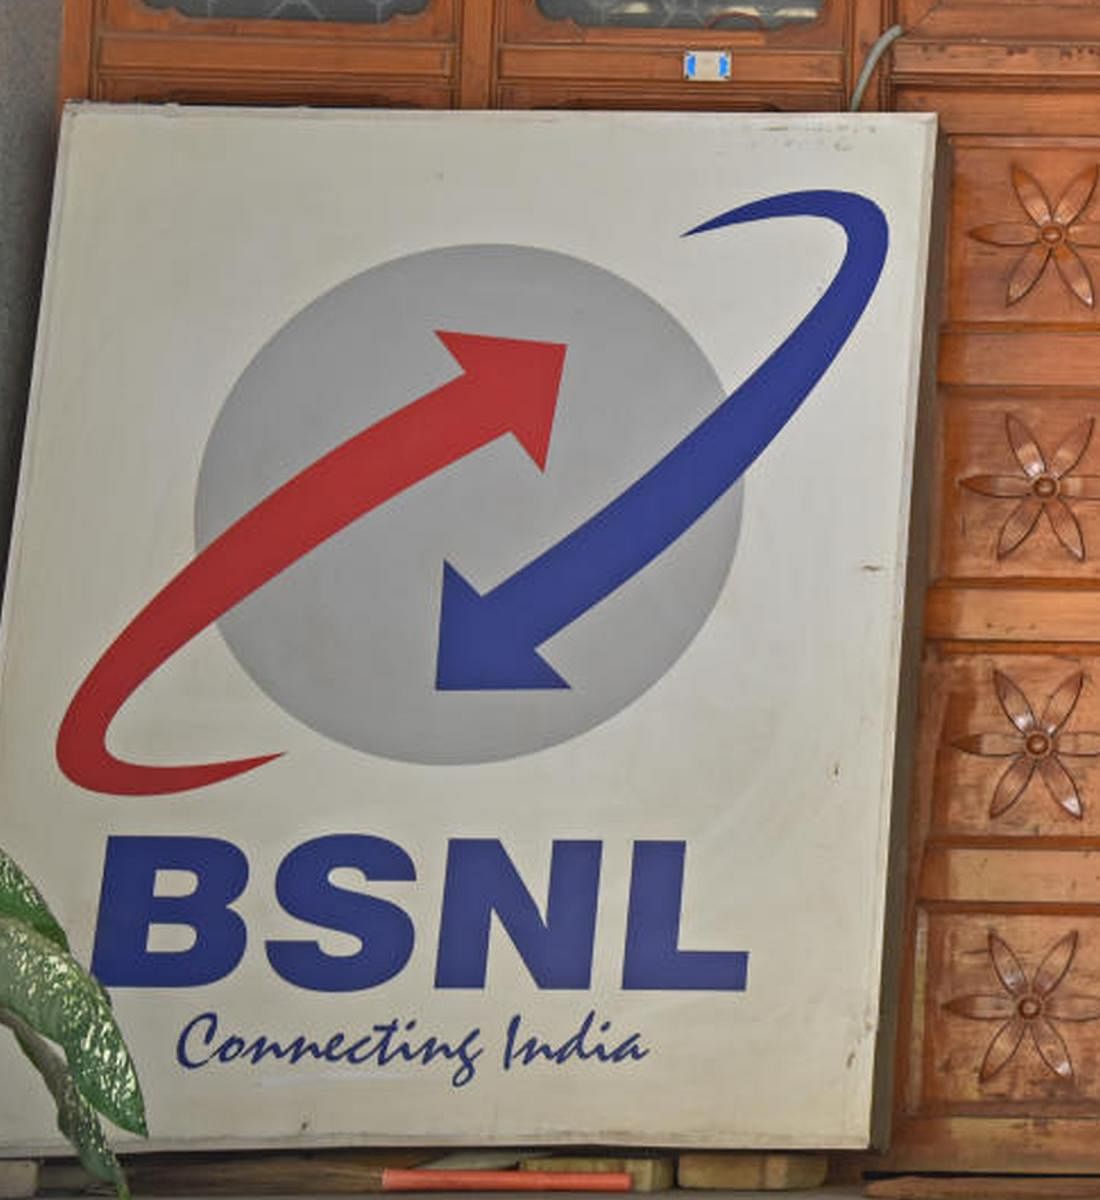 BSNL used to rule rural India since private companies were slow to go into the interiors of the nation. (DH Photo)